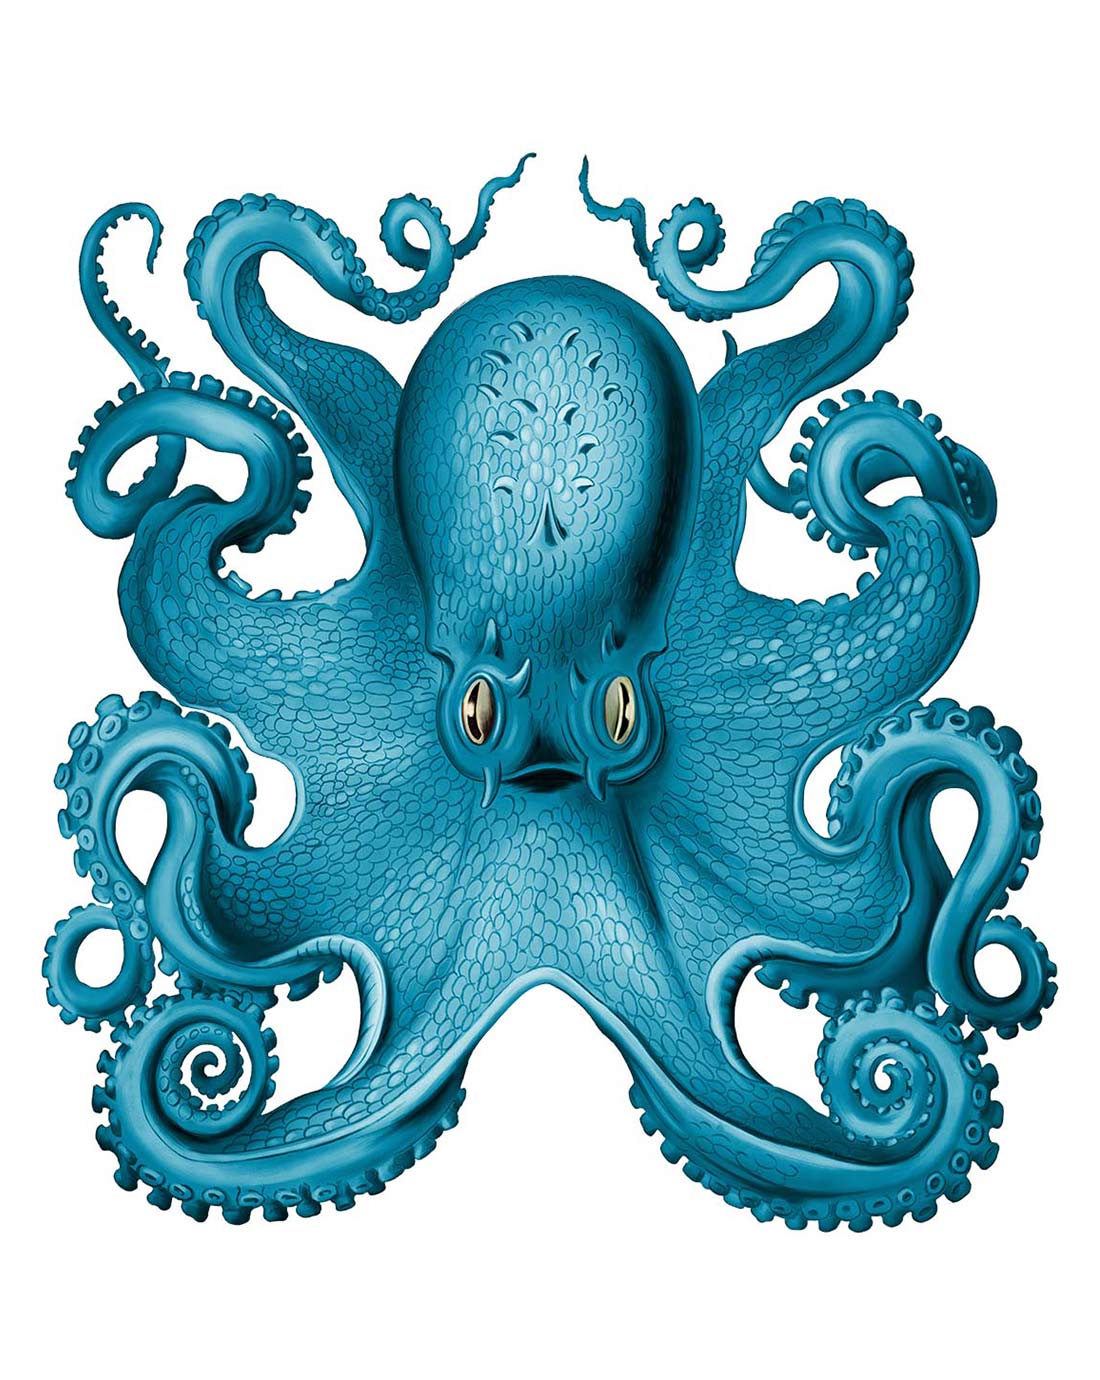 Our bespoke illustration of an Octopus with details tentacles in vivid blue